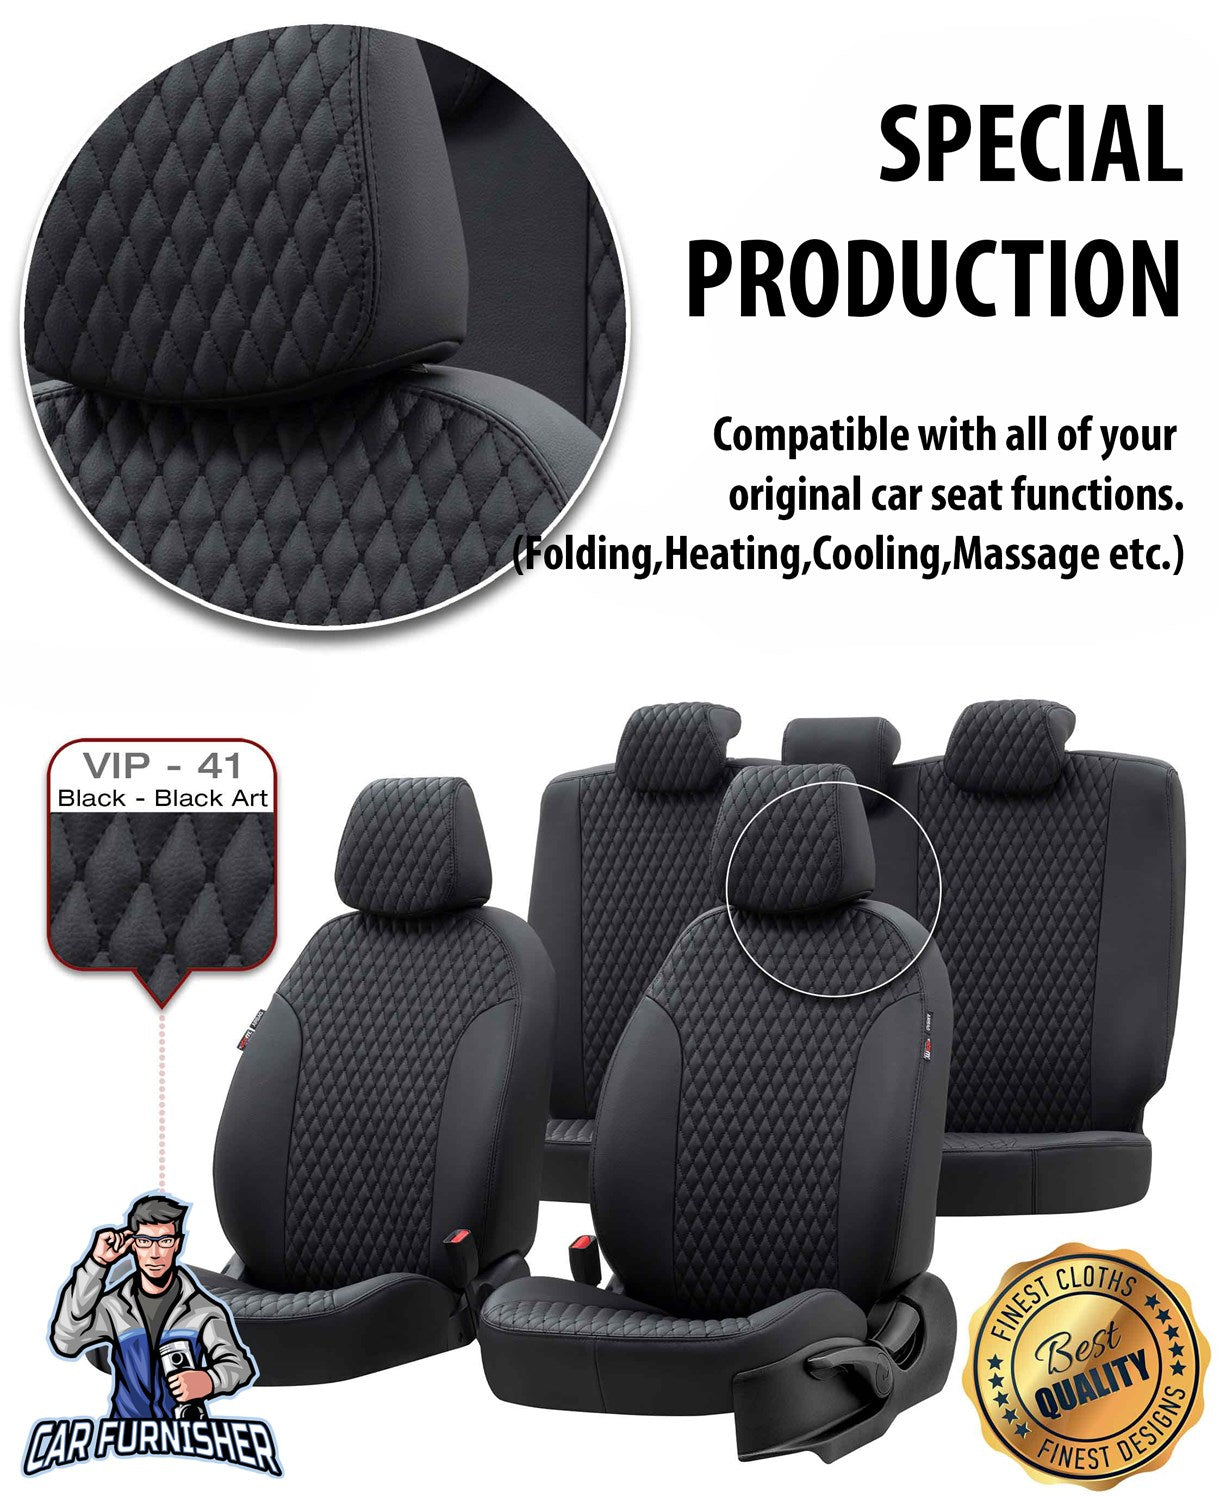 Kia XCeed Seat Covers Amsterdam Leather Design Black Leather